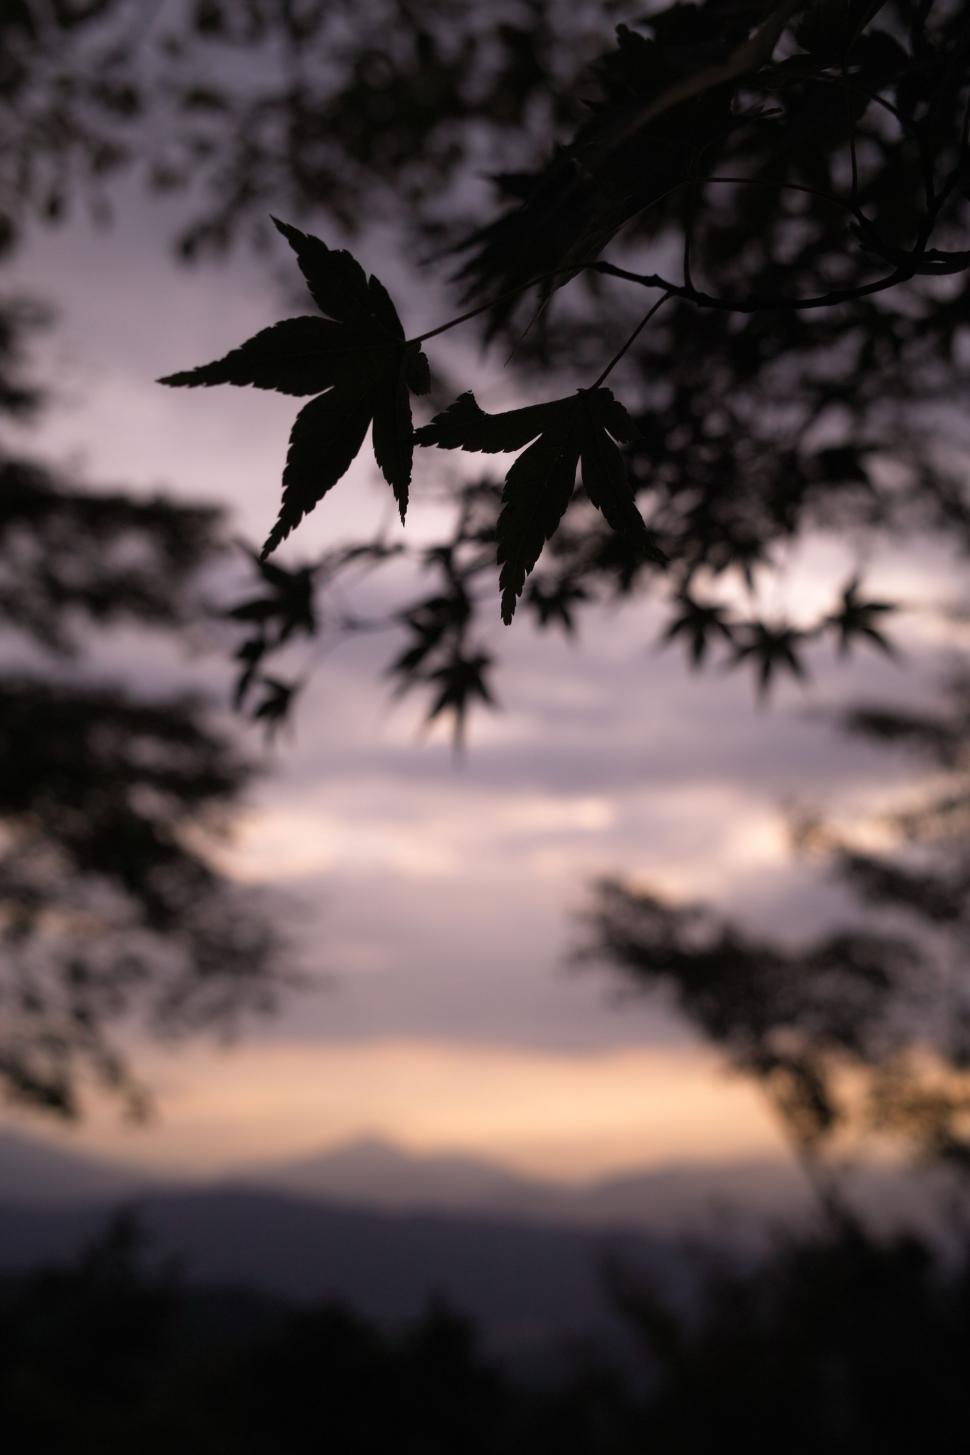 Free Image of Tree Leaves Silhouetted Against Cloudy Sky 